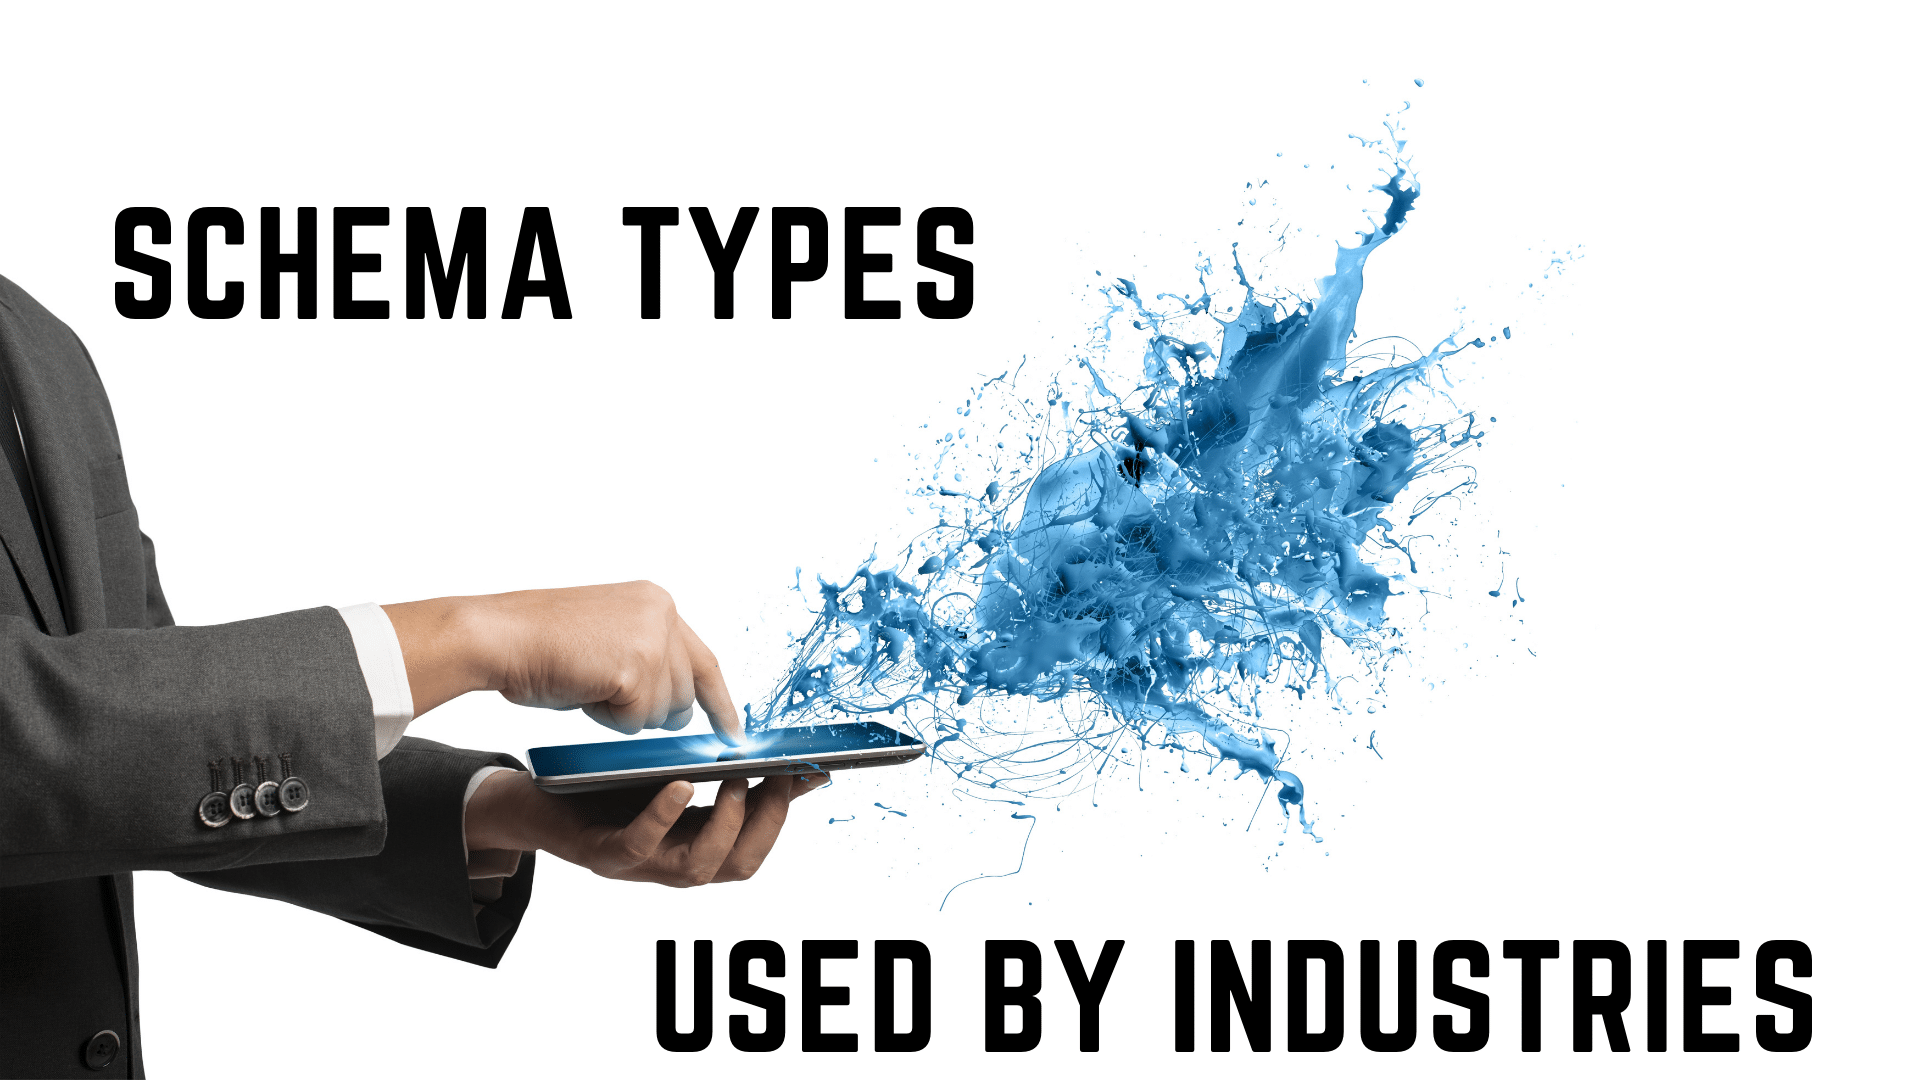 You are currently viewing Which Schema Types Are Used Most by Industry [Research]